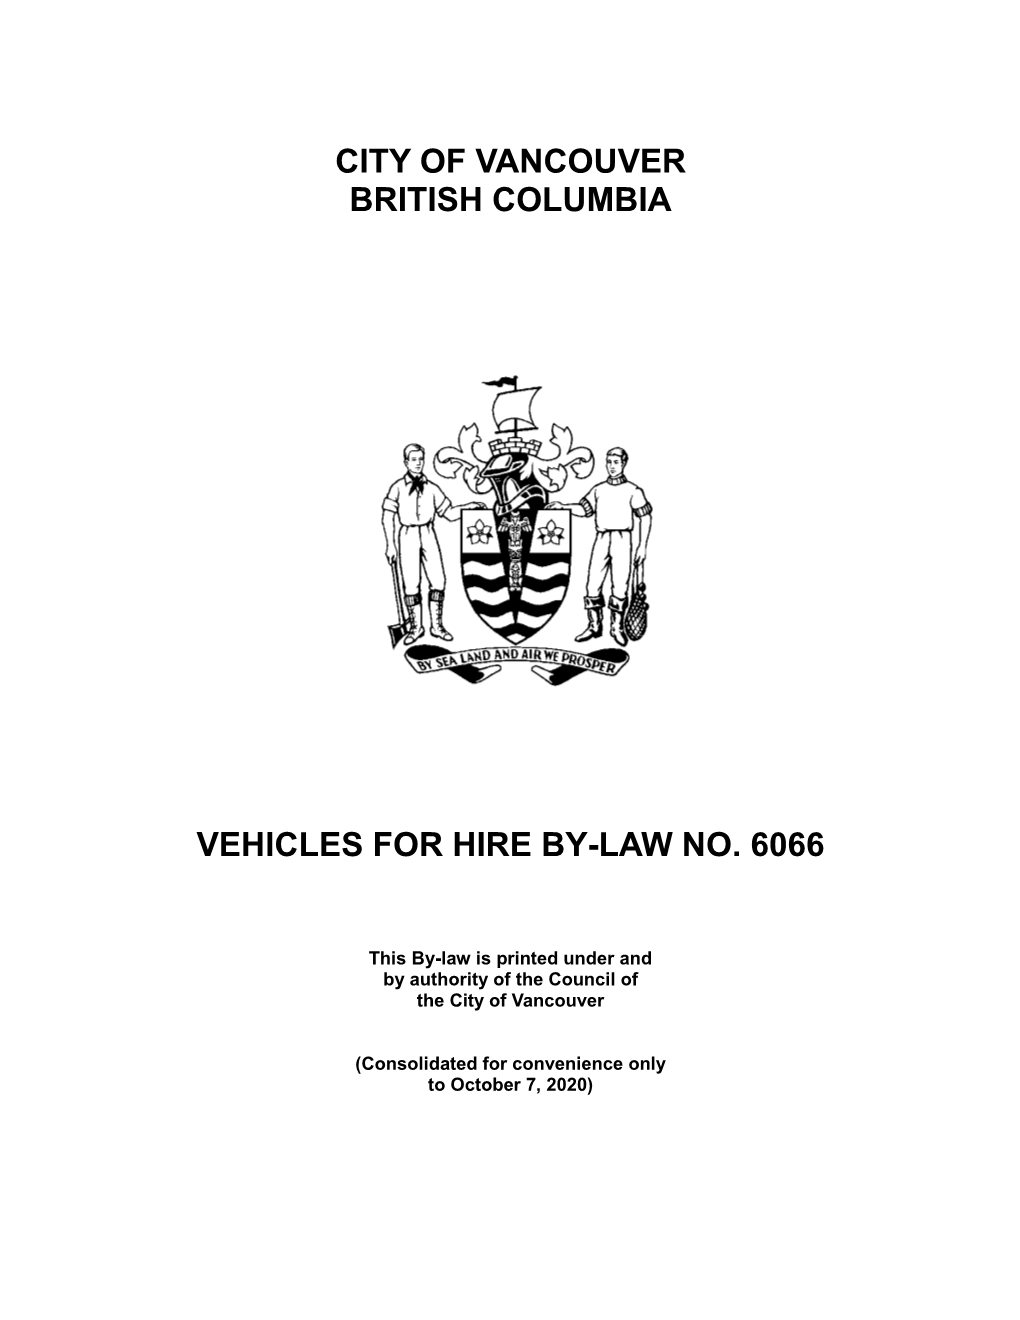 City of Vancouver British Columbia Vehicles for Hire By-Law No. 6066